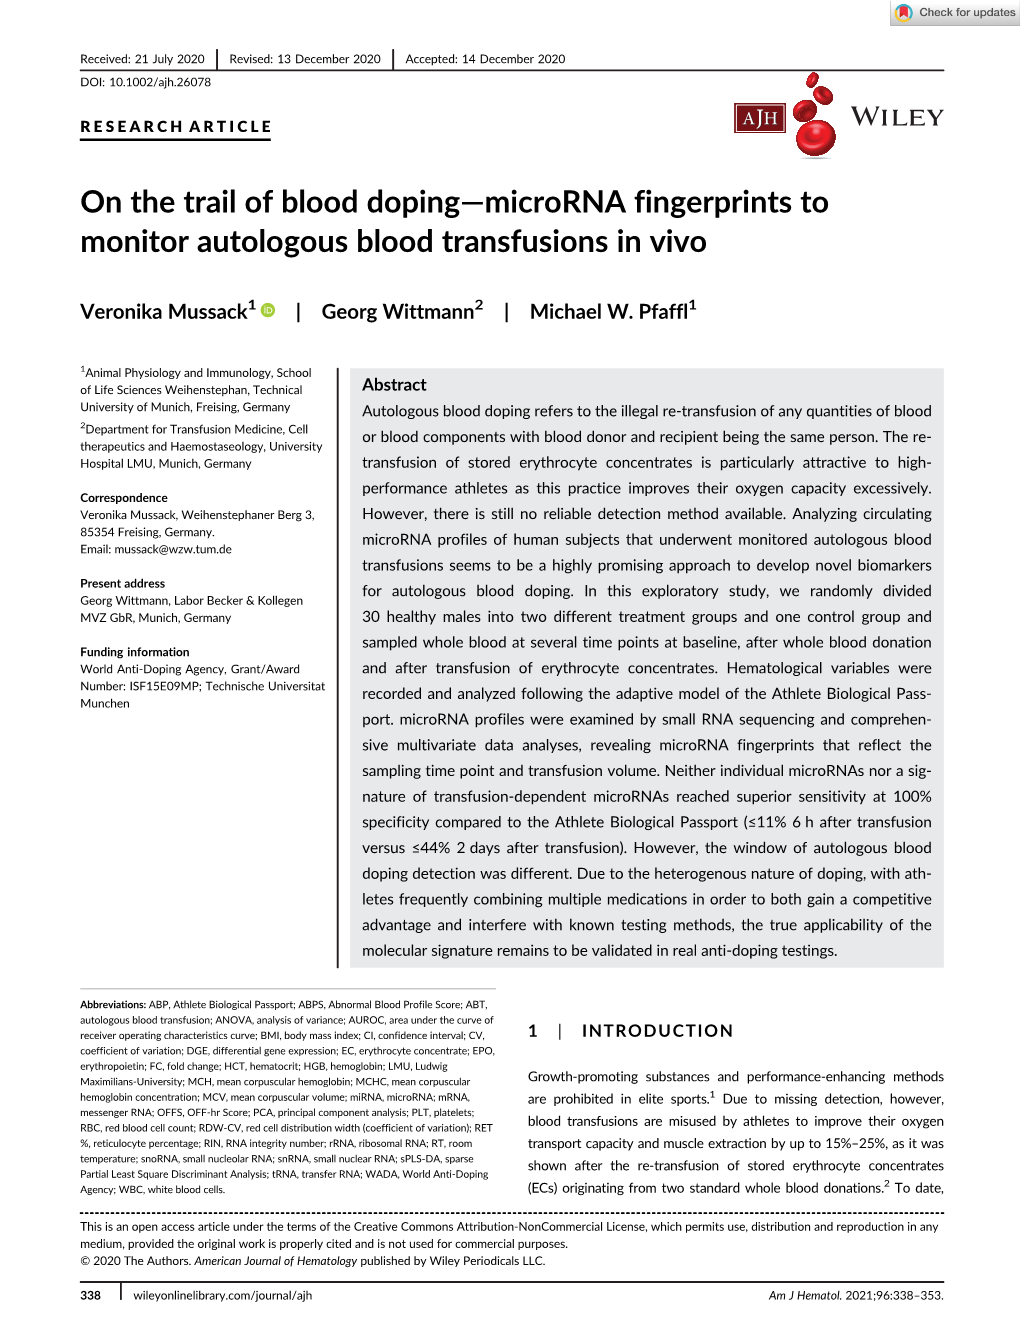 On the Trail of Blood Doping—Microrna Fingerprints to Monitor Autologous Blood Transfusions in Vivo